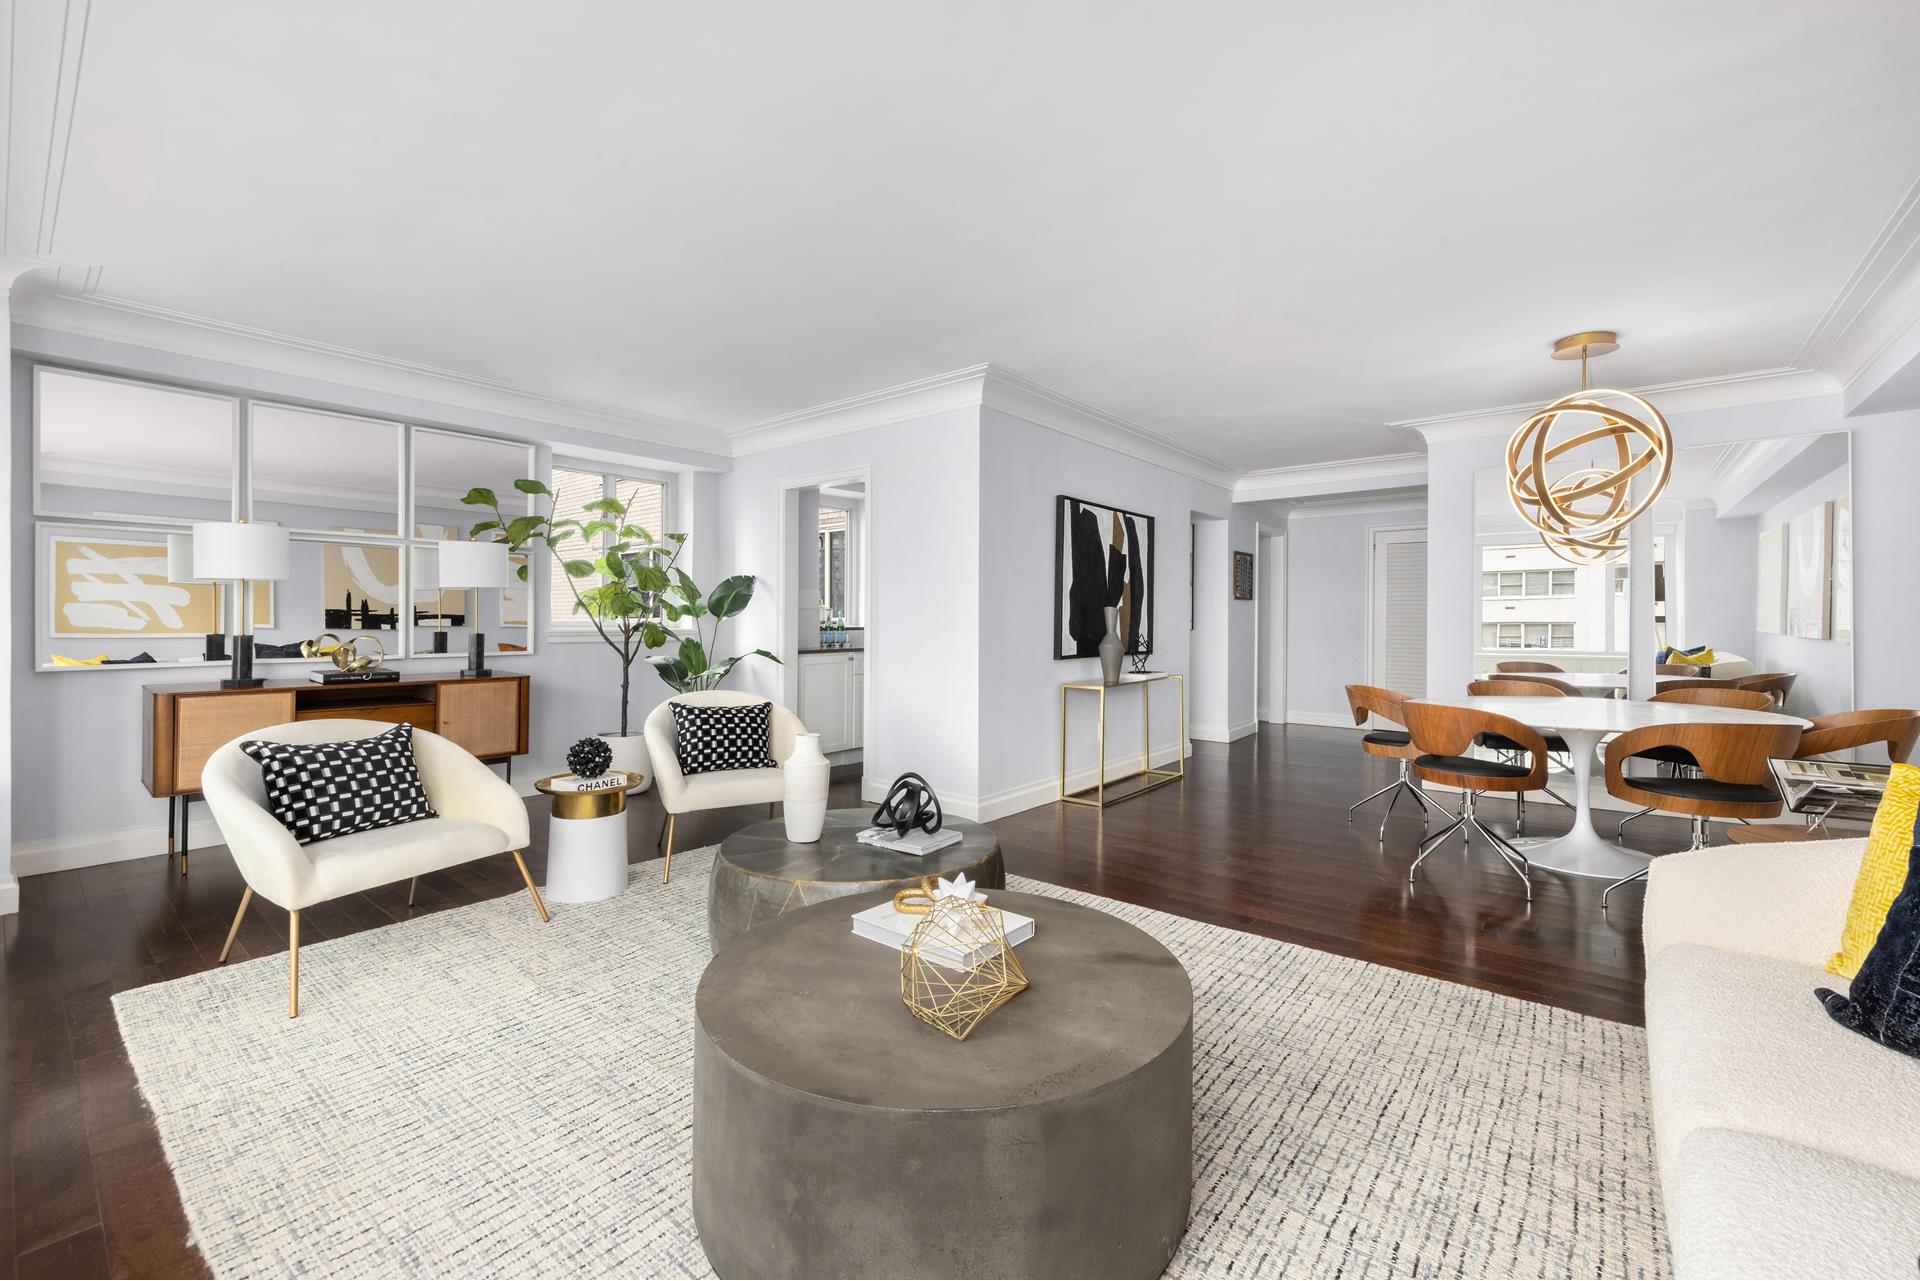 200 East 66th Street A1407, Lenox Hill, Upper East Side, NYC - 1 Bedrooms  
1 Bathrooms  
3 Rooms - 